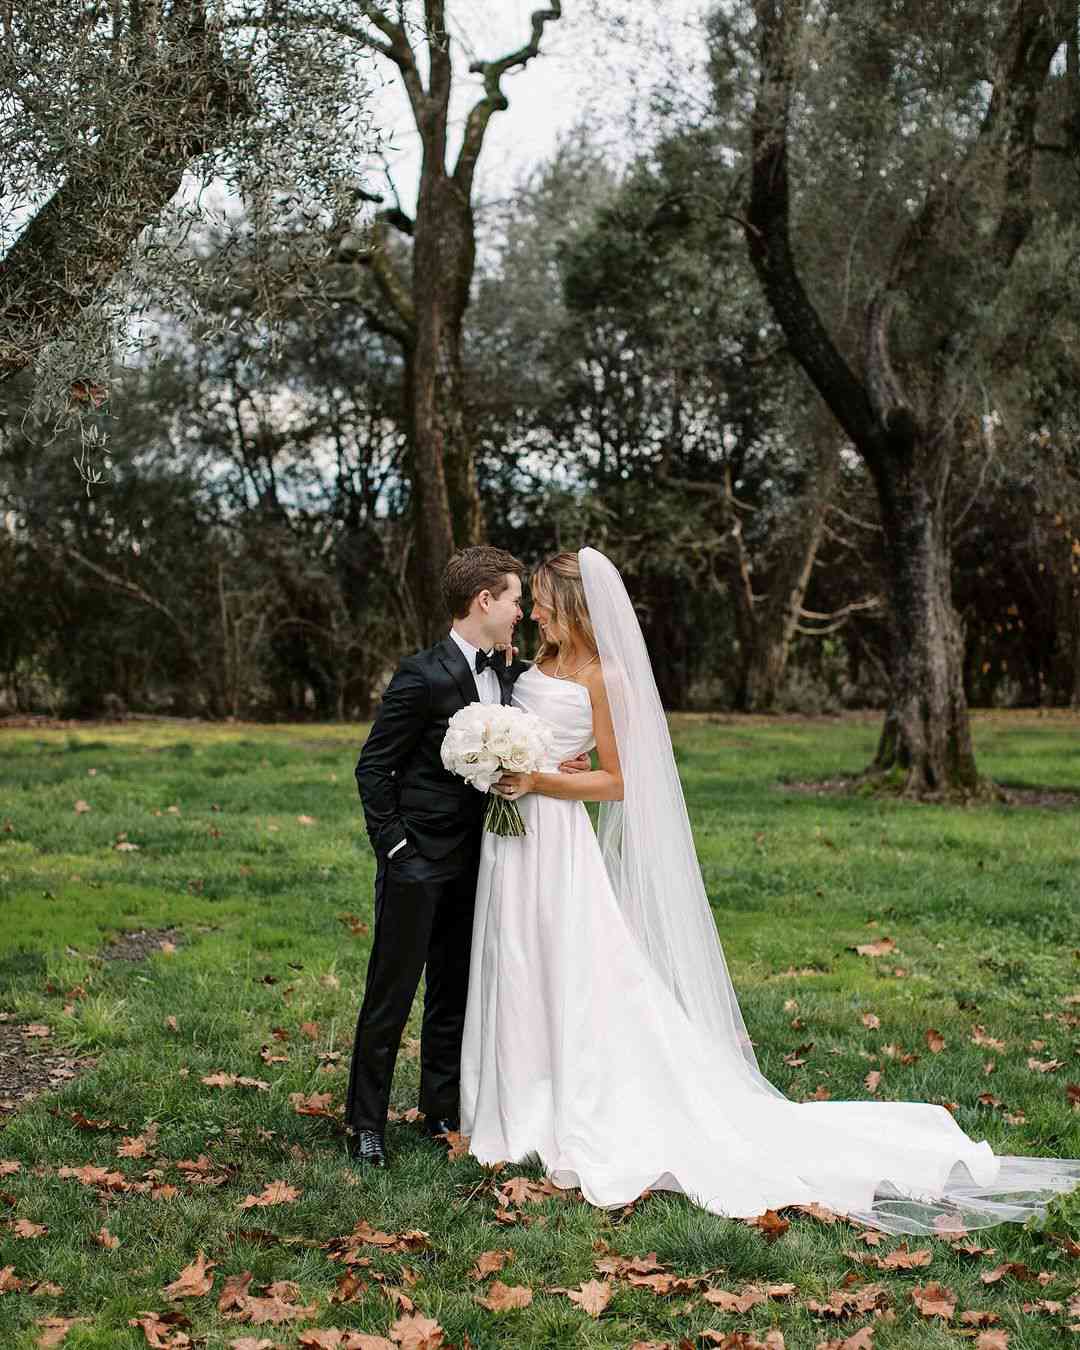 Candace Cameron Bure's Son Lev Is Married: 'My Heart Is Full'